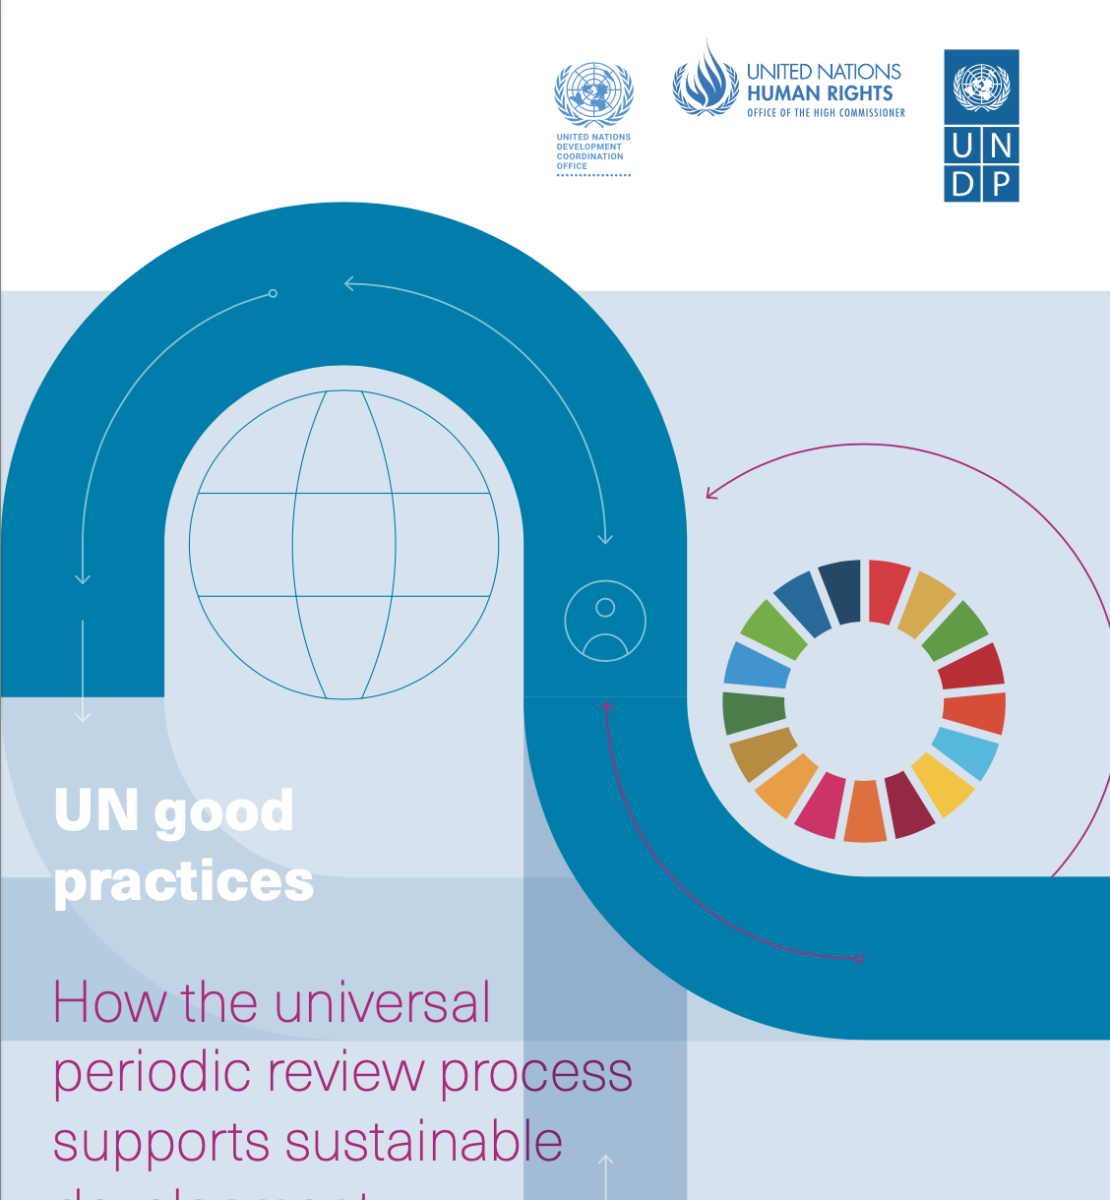 A cover features UNDCO, UNHCR, UNDP logos on top as well as a few design elements and publication title.